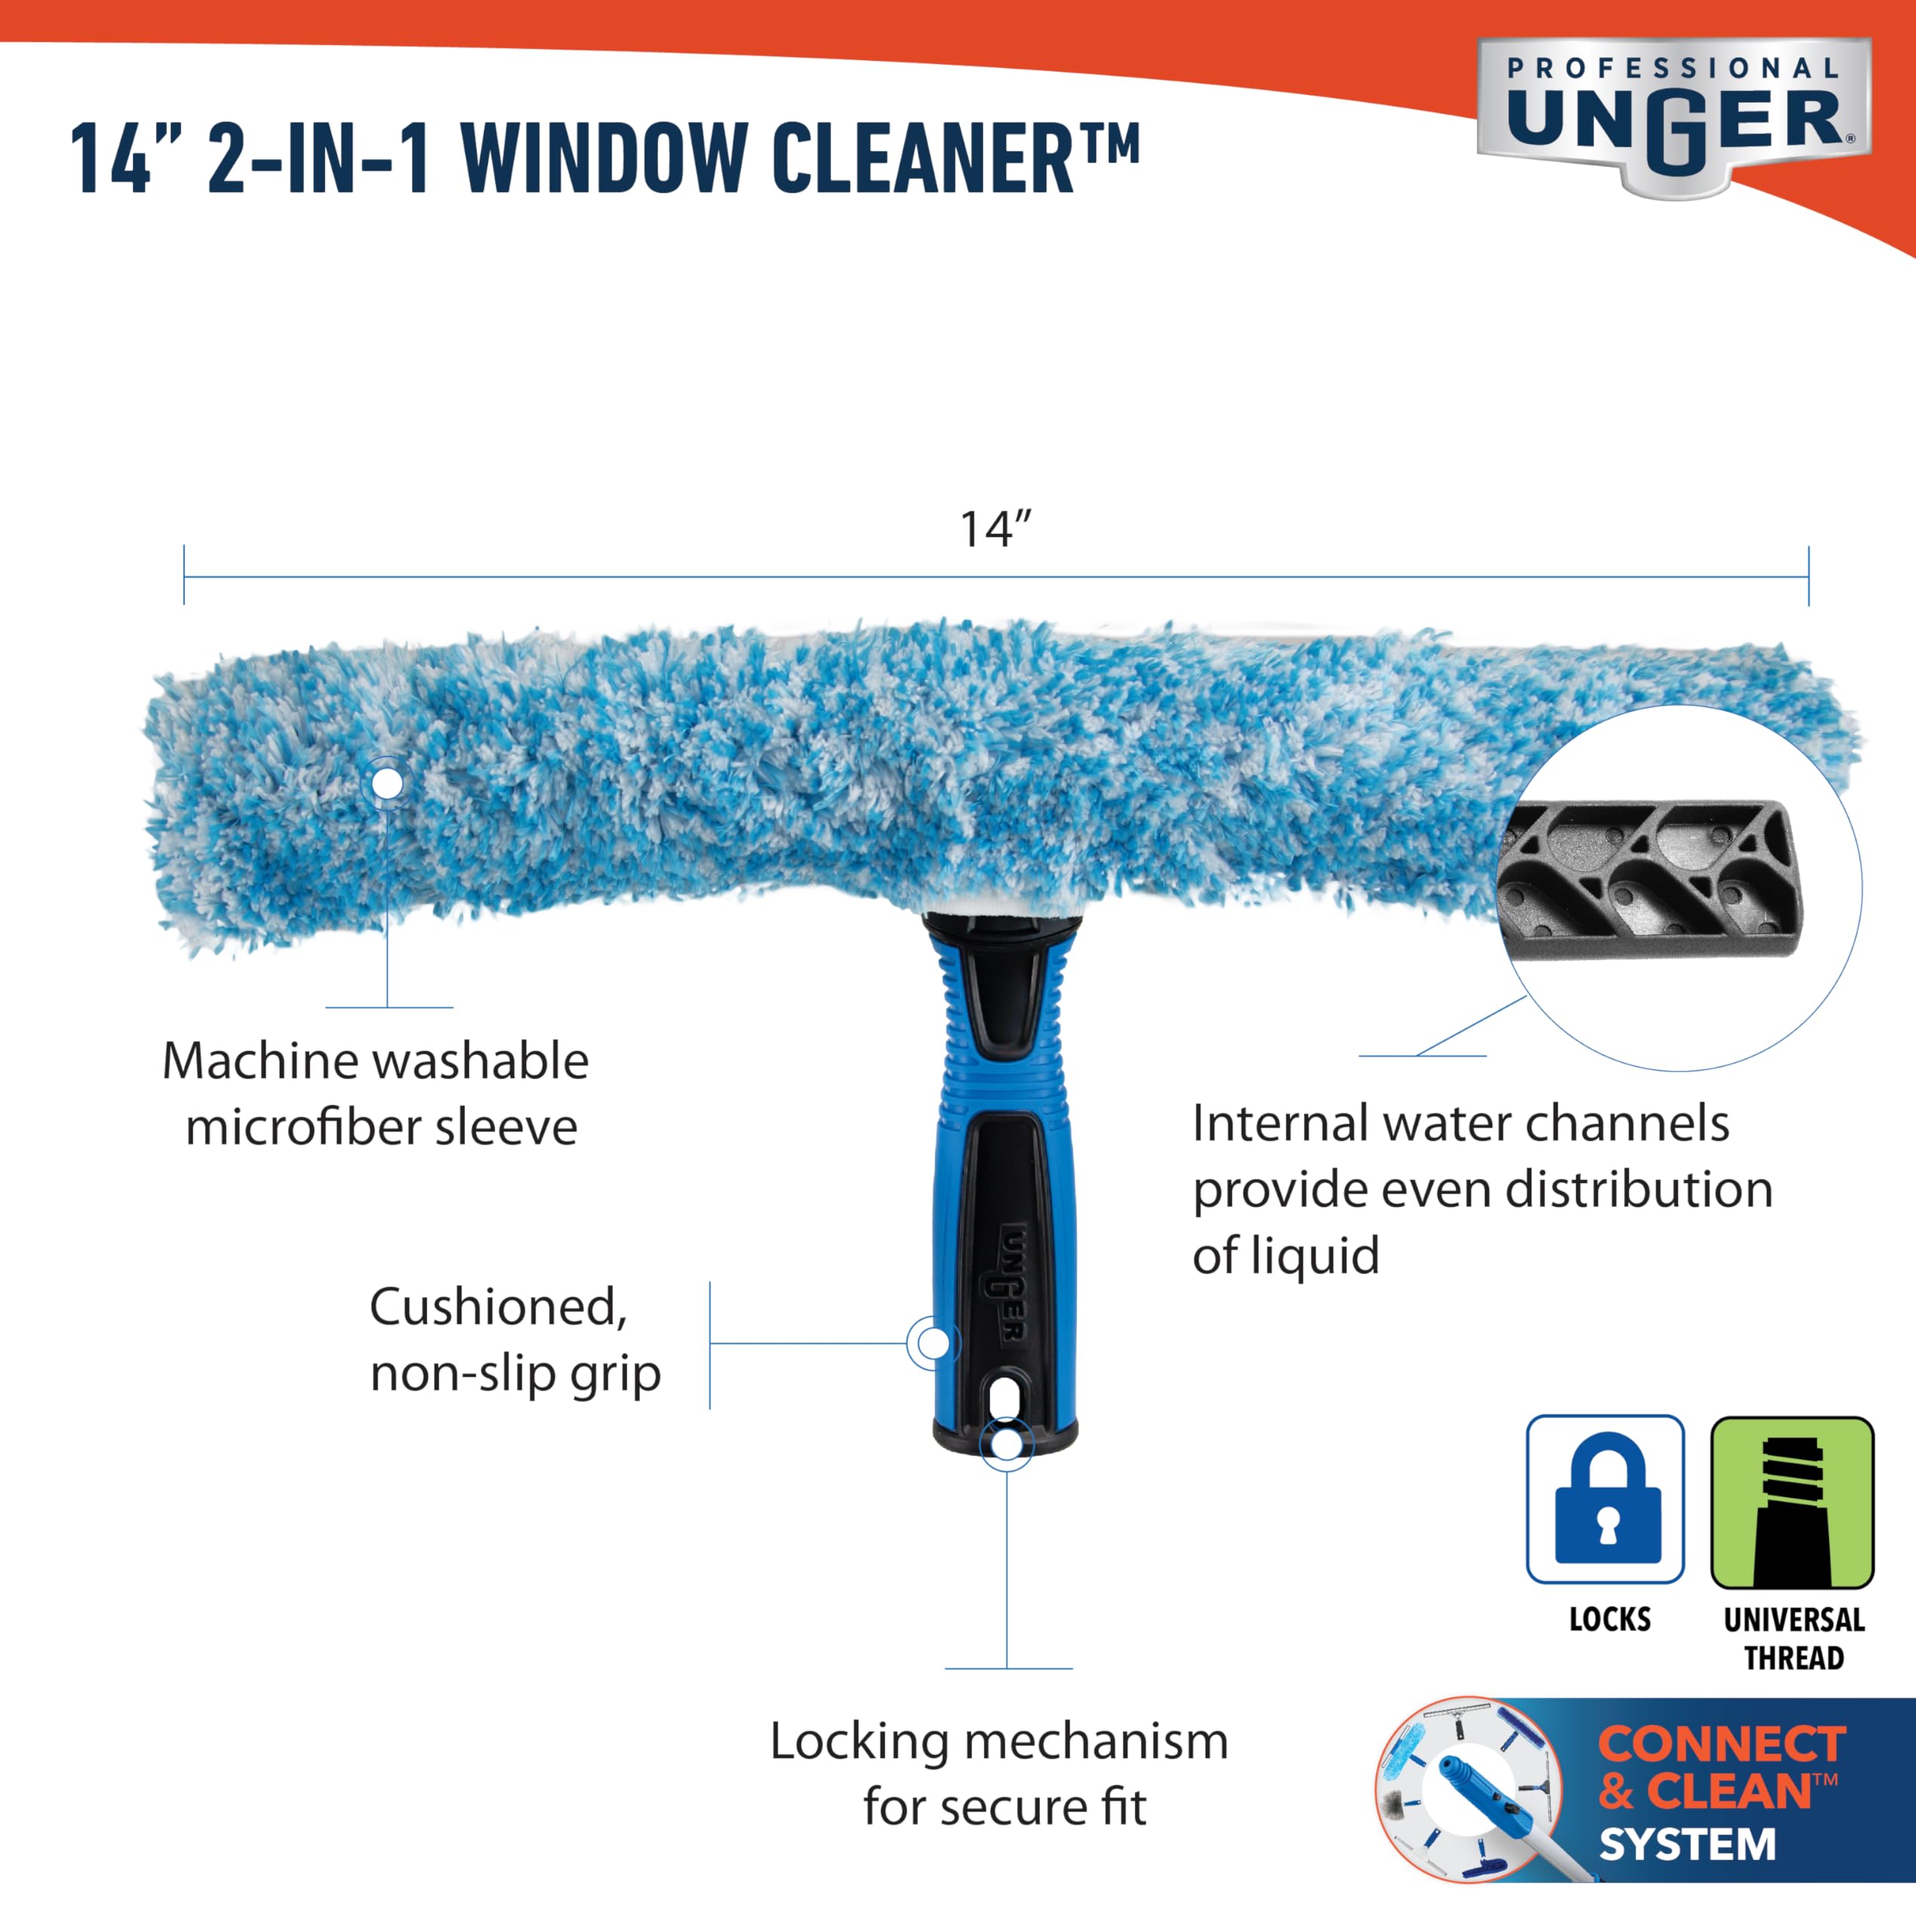 Unger Professional 2-in-1 Squeegee & Scrubber - 14” Window Cleaning Tool – Cleaning Supplies, Squeegee for Window Cleaning, Commercial & Residential Use, Reusable Microfiber Sleeve